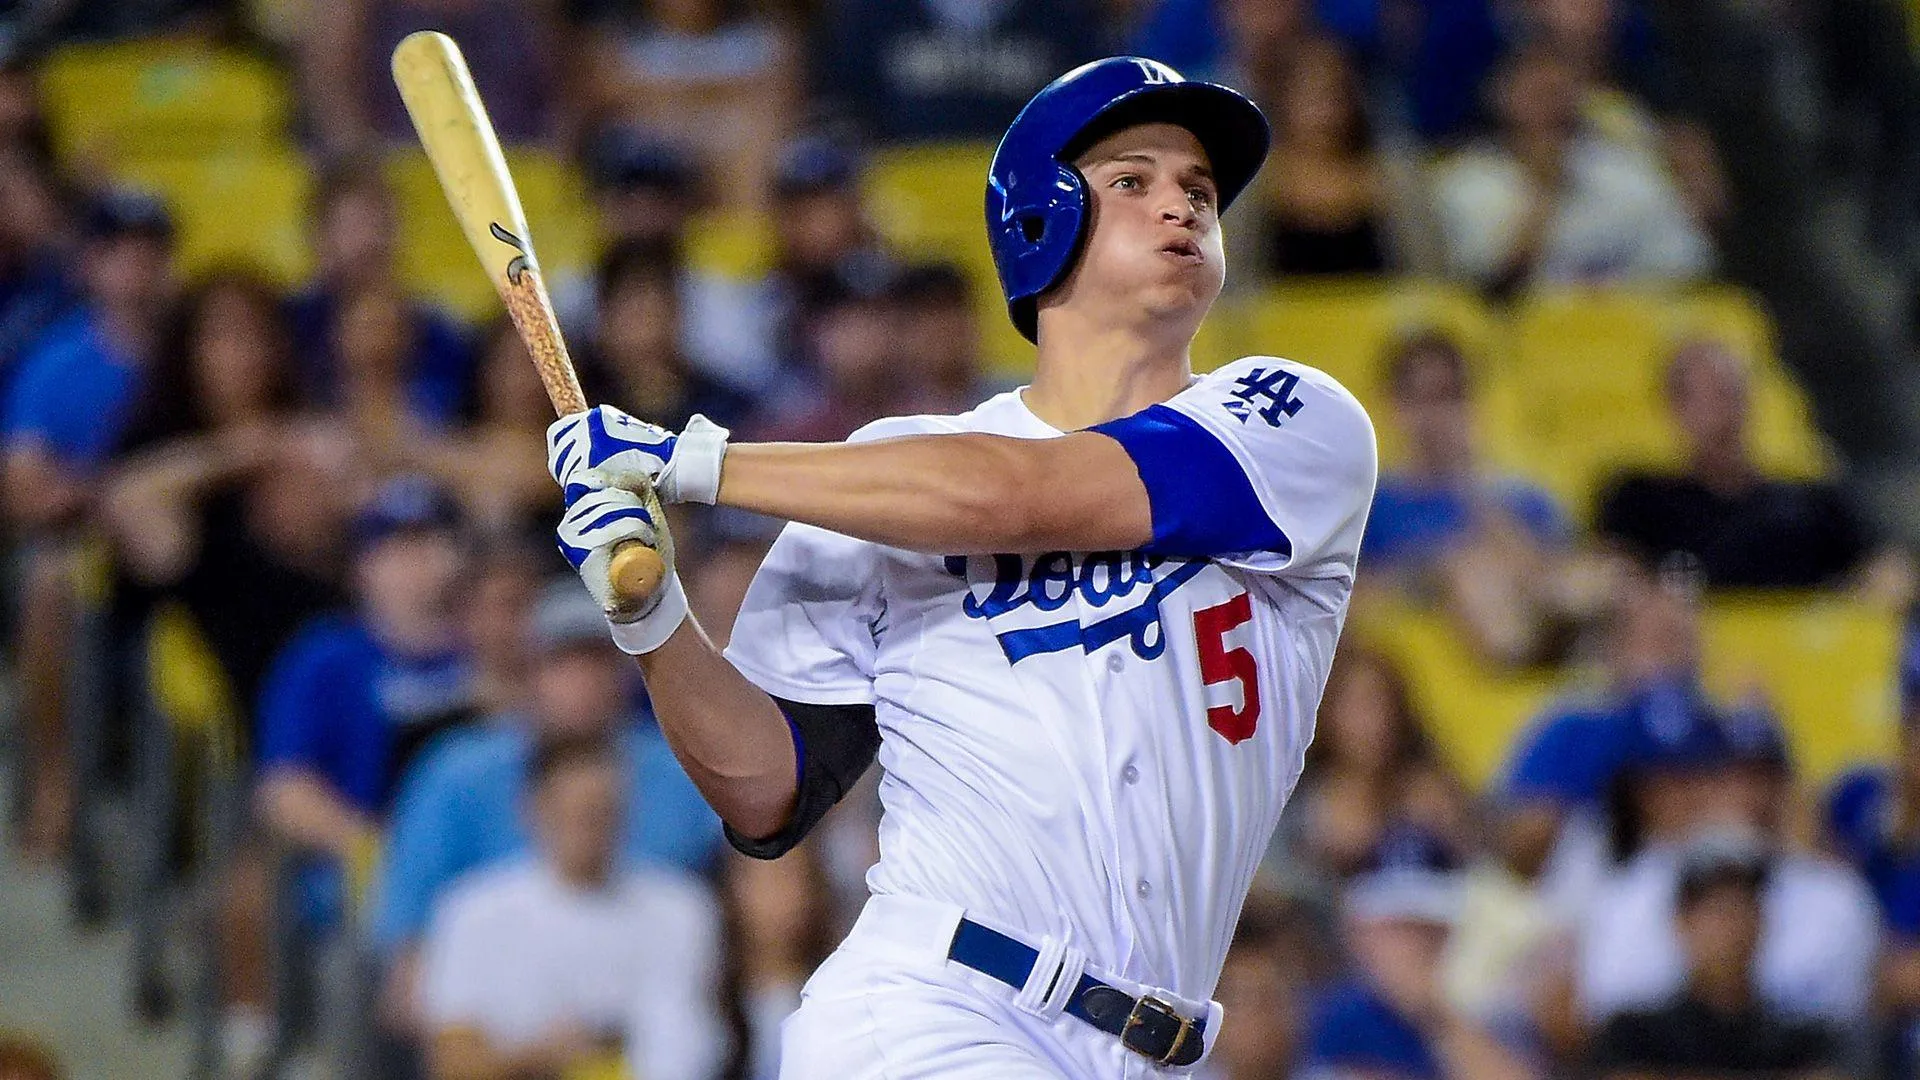 Texas' first World Series MVP is Rangers' Corey Seager, a fourth-time winner.